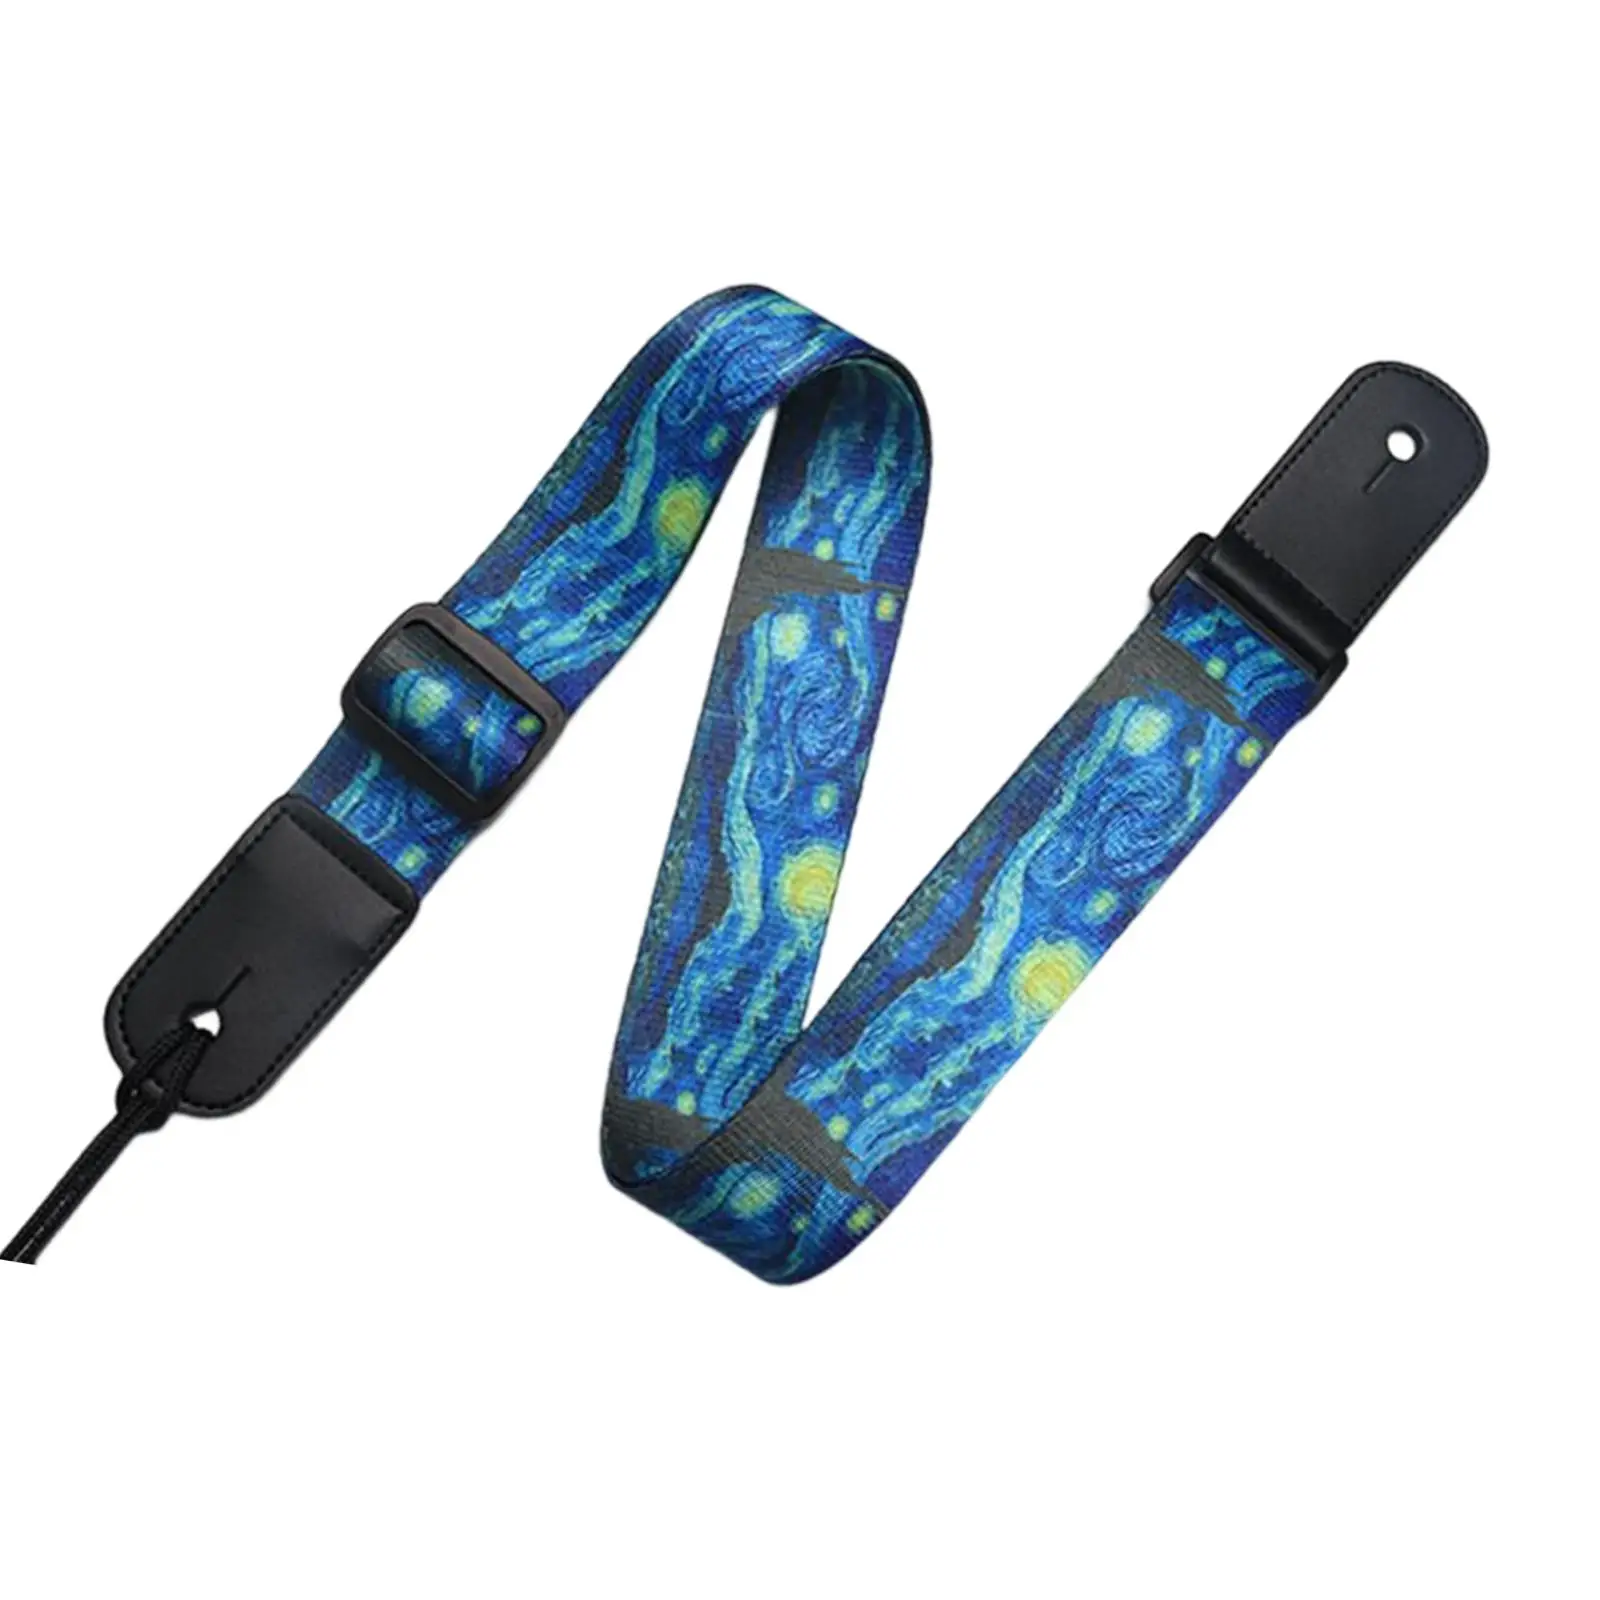 Adjustable Acoustic Guitar Strap Belt for Classical Guitar Acoustic Electric Guitar Bass Ukulele Musical Instrument Accessories